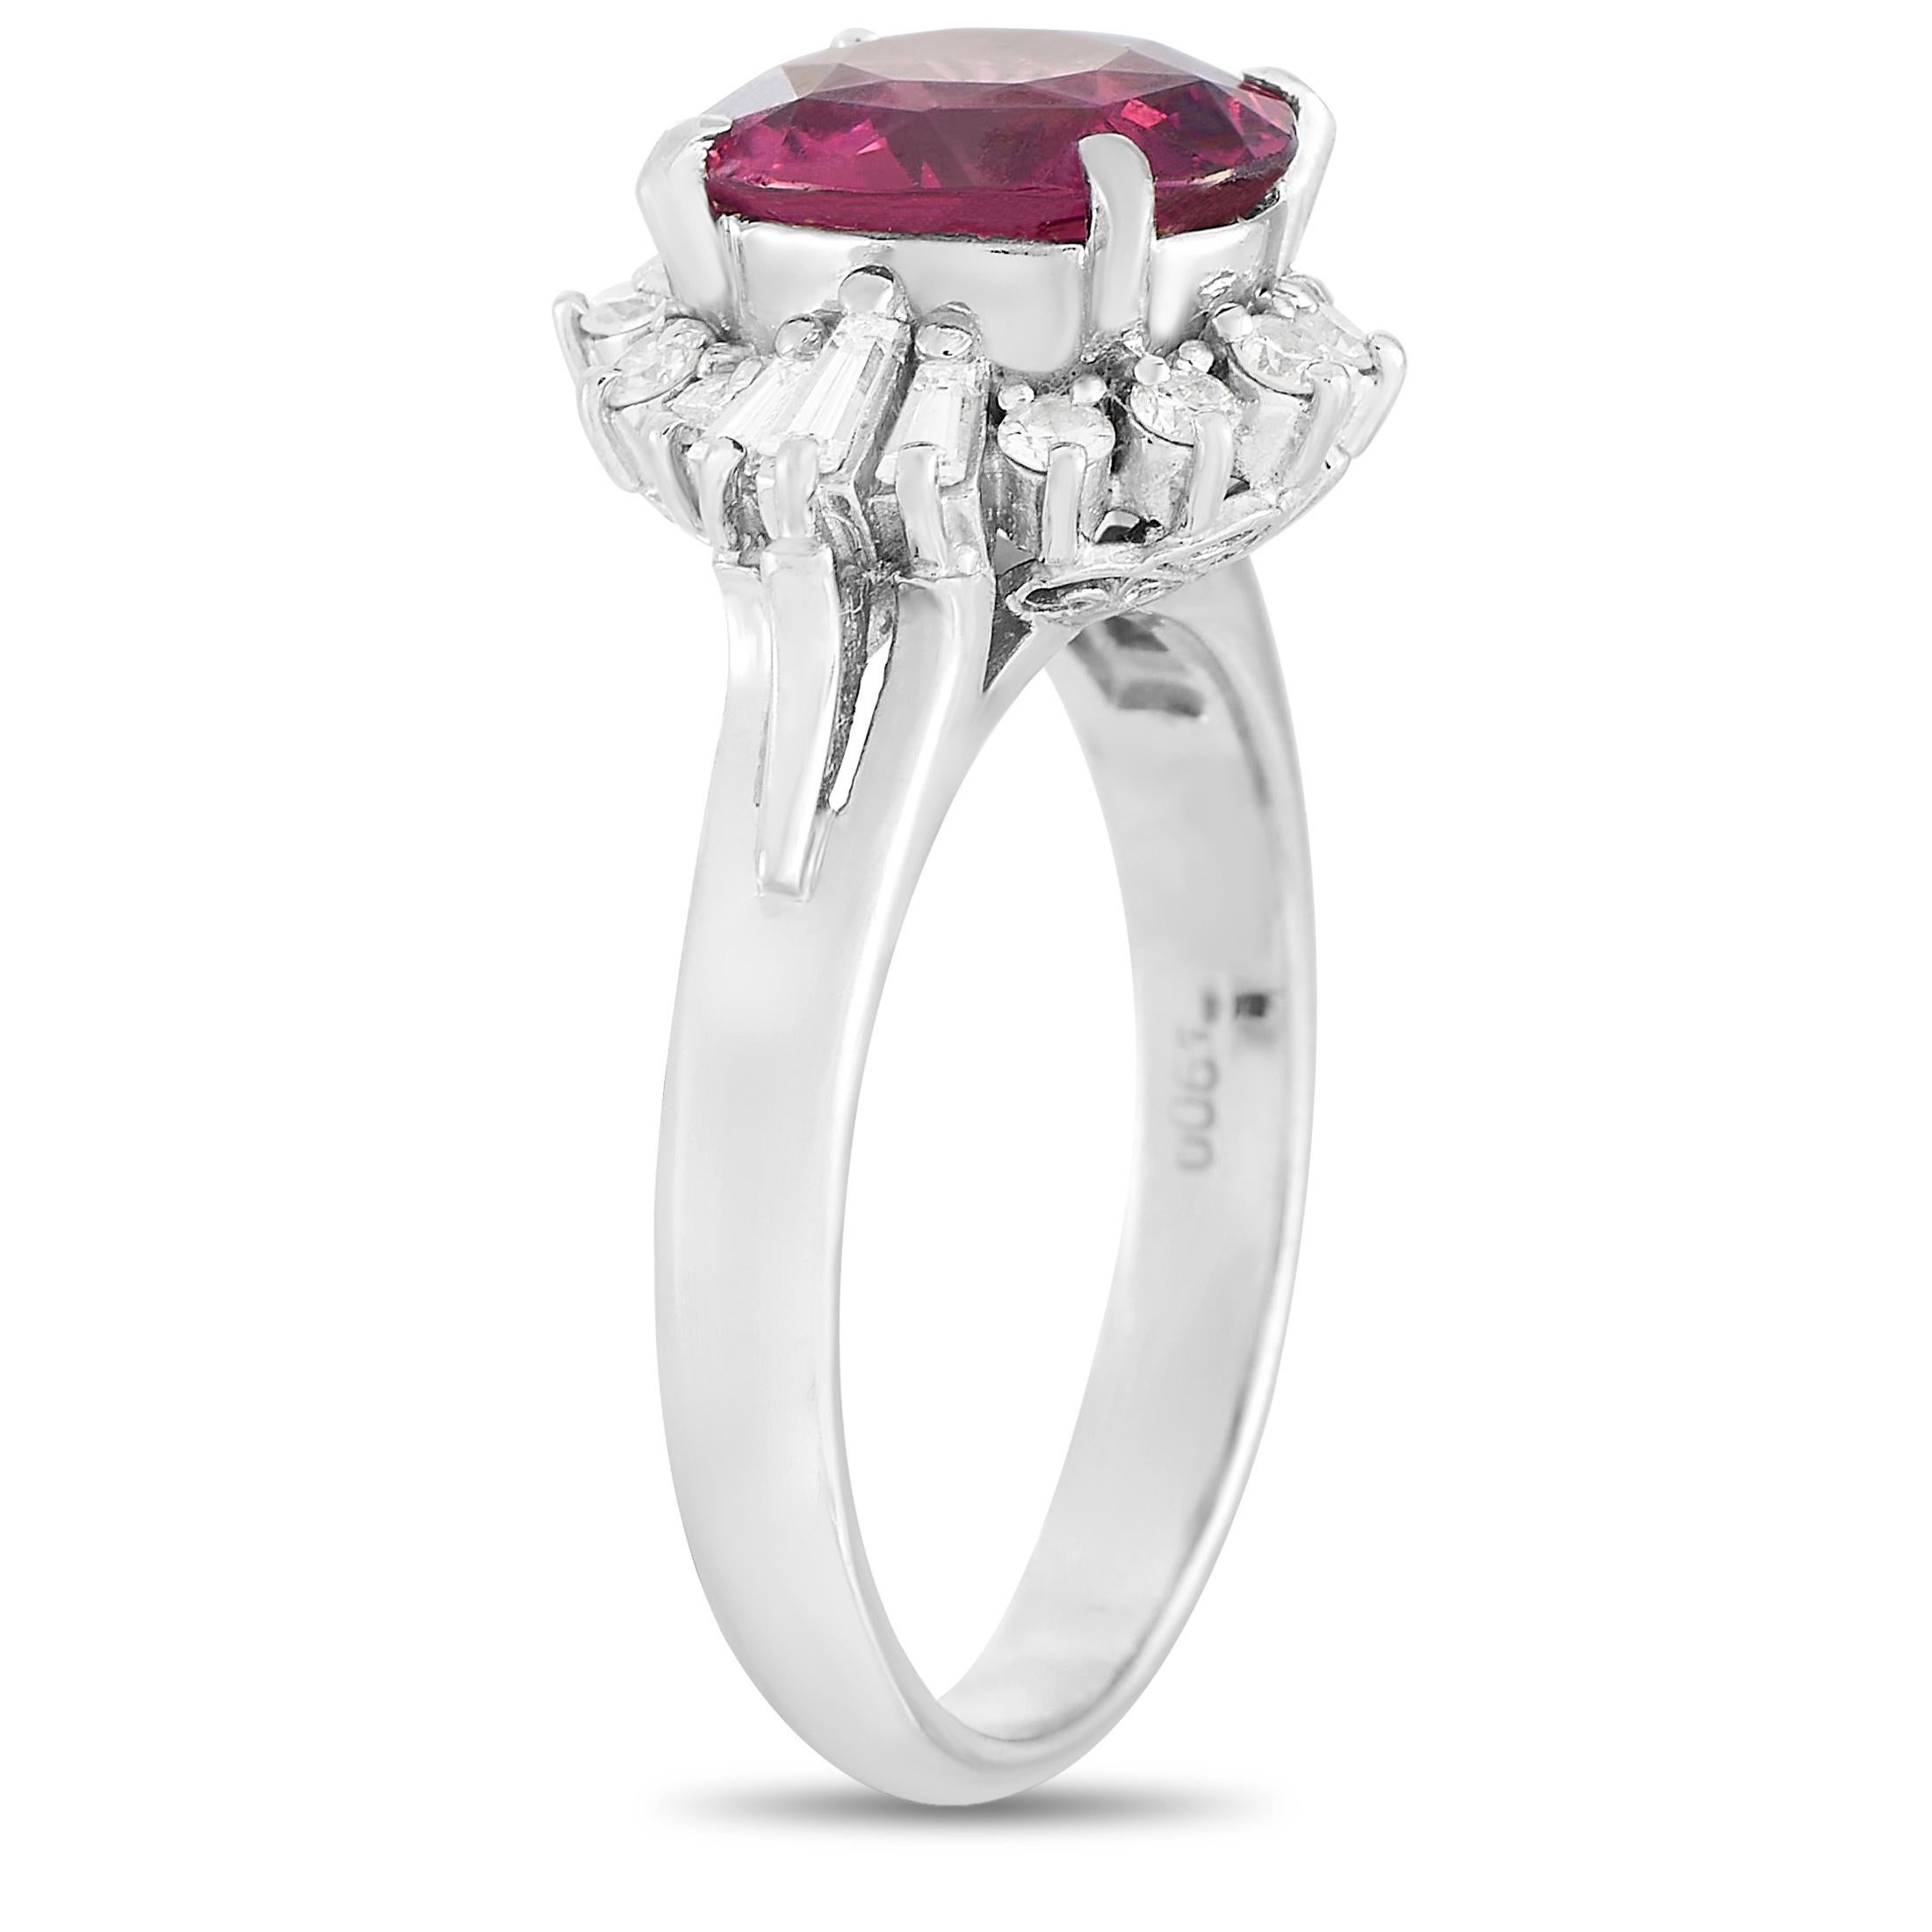 This gorgeous LB Exclusive Platinum 0.36 ct Diamond and Tourmaline Ring is made with platinum and set with a total of 0.36 carats of baguette and round diamonds forming a halo around the stunning 2.29 carat tourmaline center stone. The ring has a